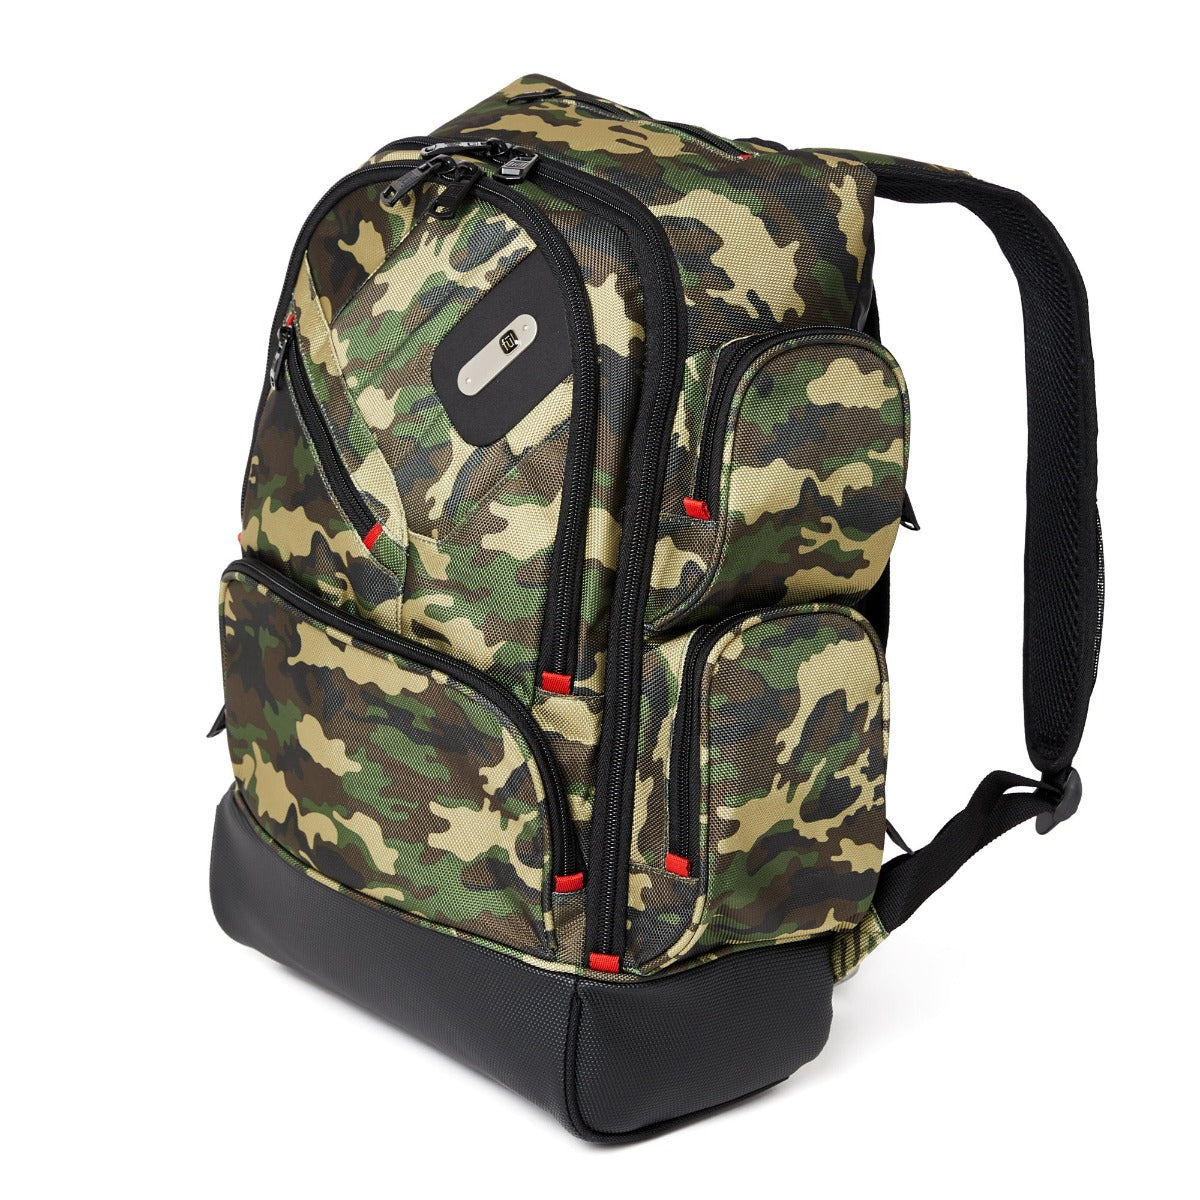 Ful Refugee Woodland tech backpack in camouflage camo print